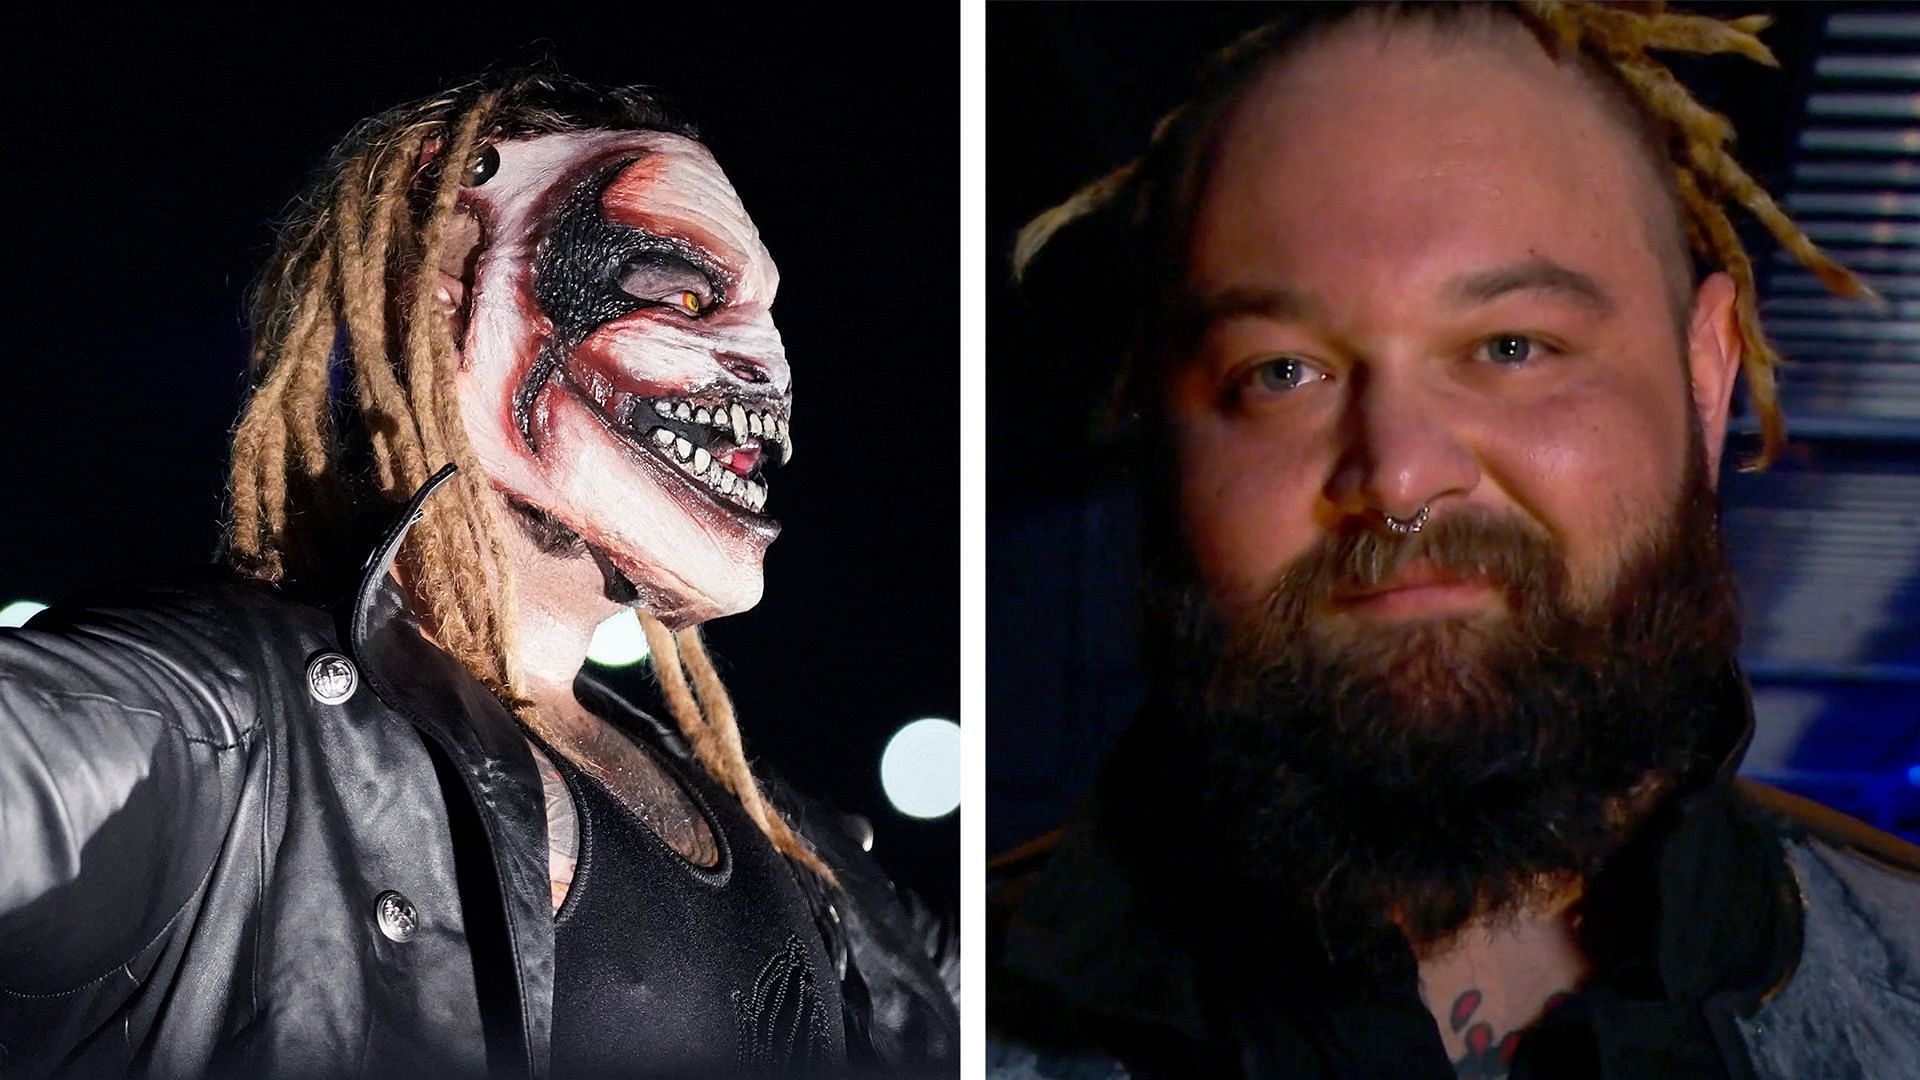 Bray Wyatt had several big matches in WWE as The Fiend